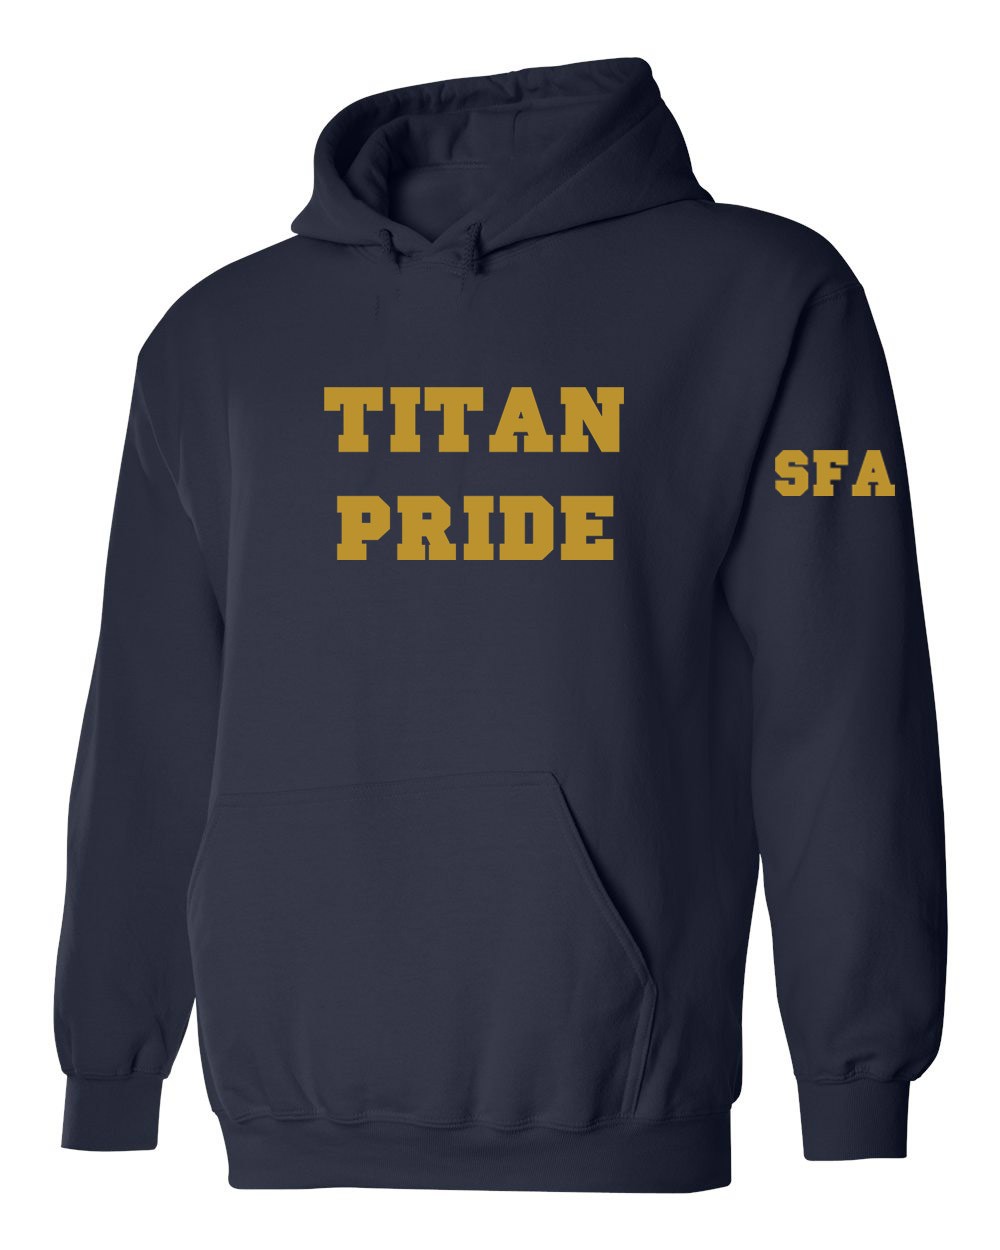 SFA TITANS Pullover Hoodie w/Logo & Custom Name - Please Allow 2-3 Weeks For Delivery 